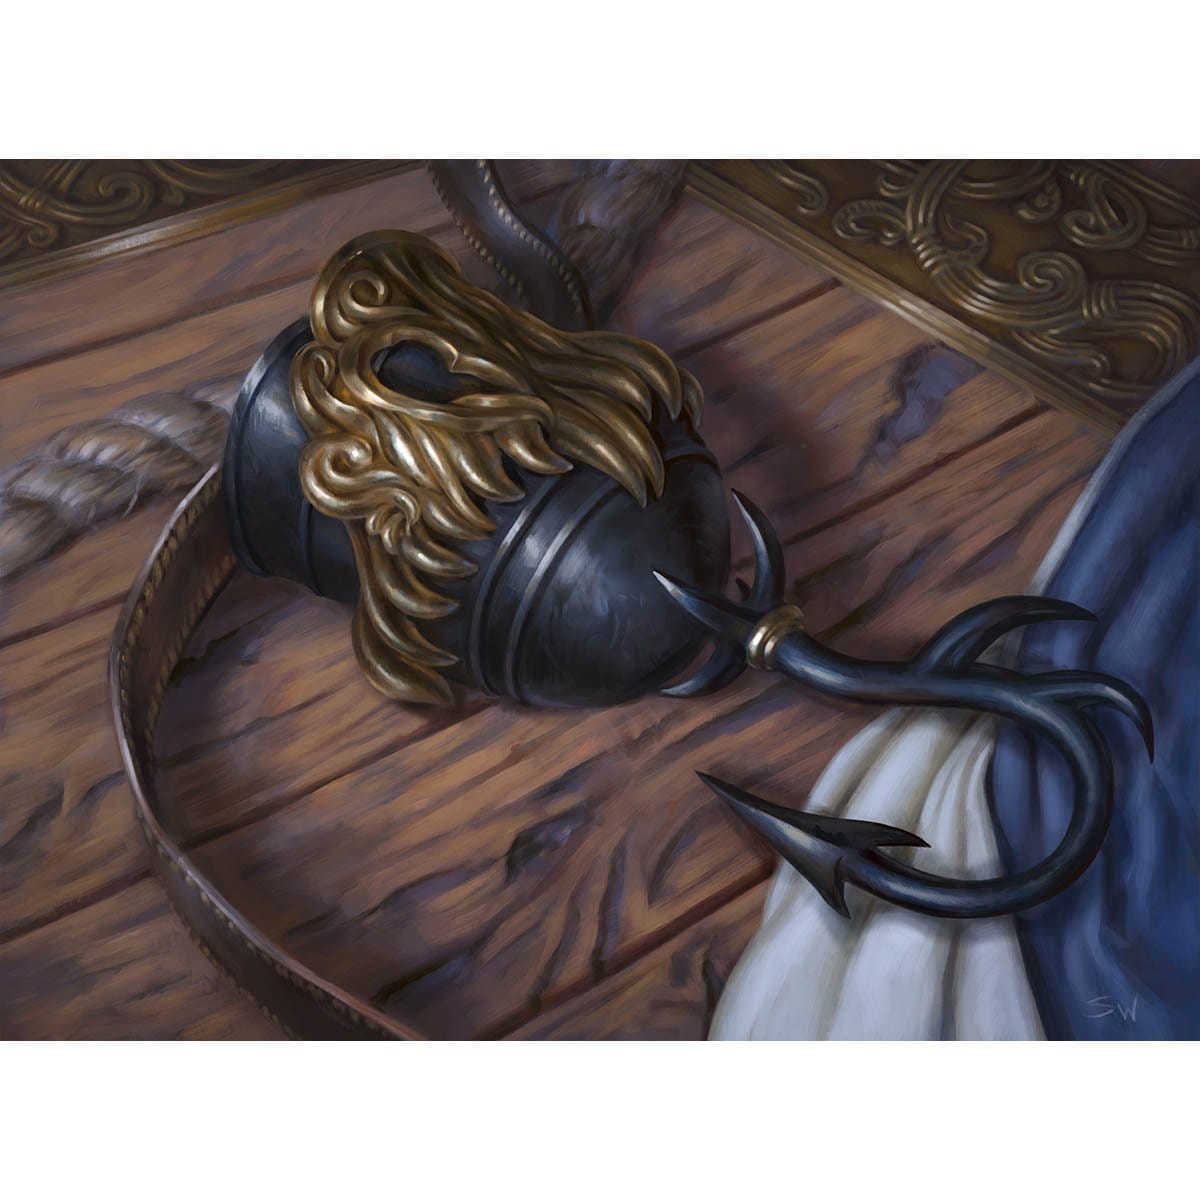 Captain's Hook Print - Print - Original Magic Art - Accessories for Magic the Gathering and other card games